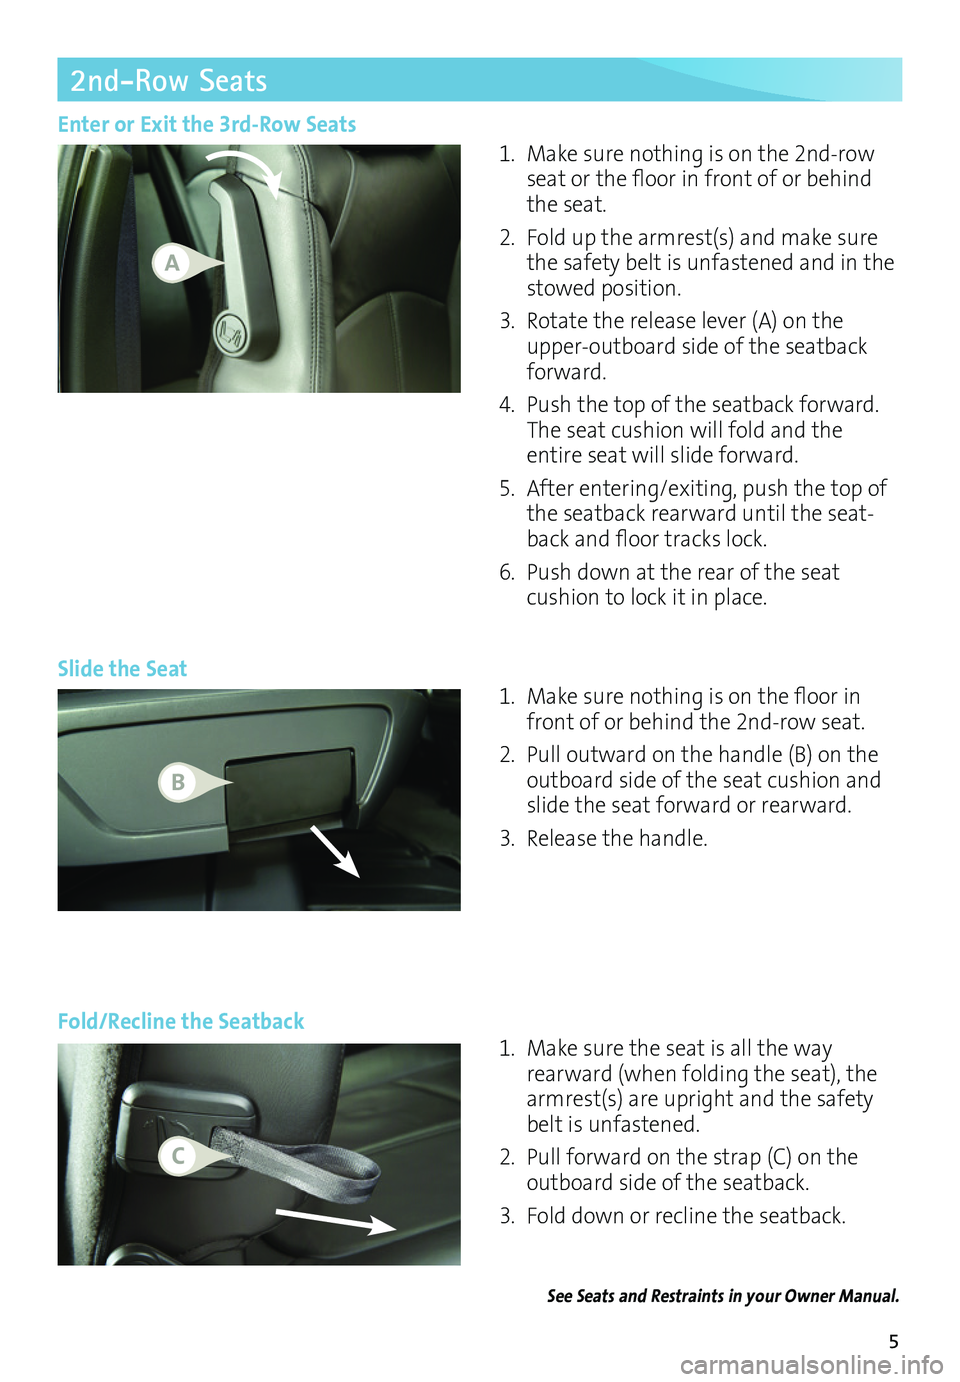 BUICK ENCLAVE 2017  Get To Know Guide 5
2nd-Row Seats 
Slide the Seat
1. Make sure nothing is on the 2nd-row seat or the floor in front of or behind the seat.
2. Fold up the armrest(s) and make sure the safety belt is unfastened and in th